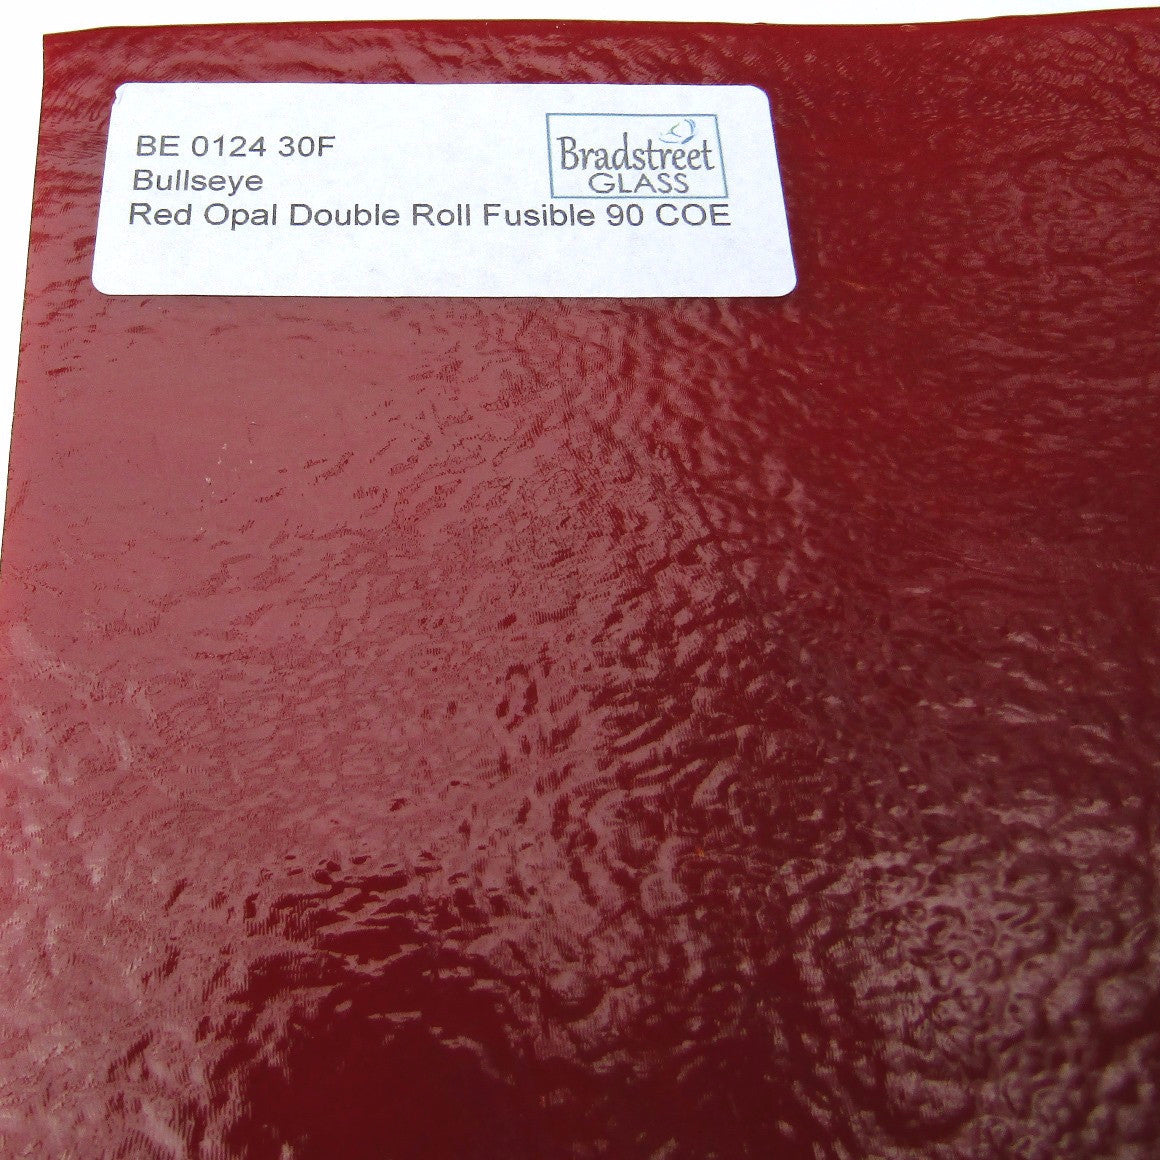 Bullseye Red Opal Double Rolled Fusible 90 COE Stained Glass Sheet BE 0124 30F